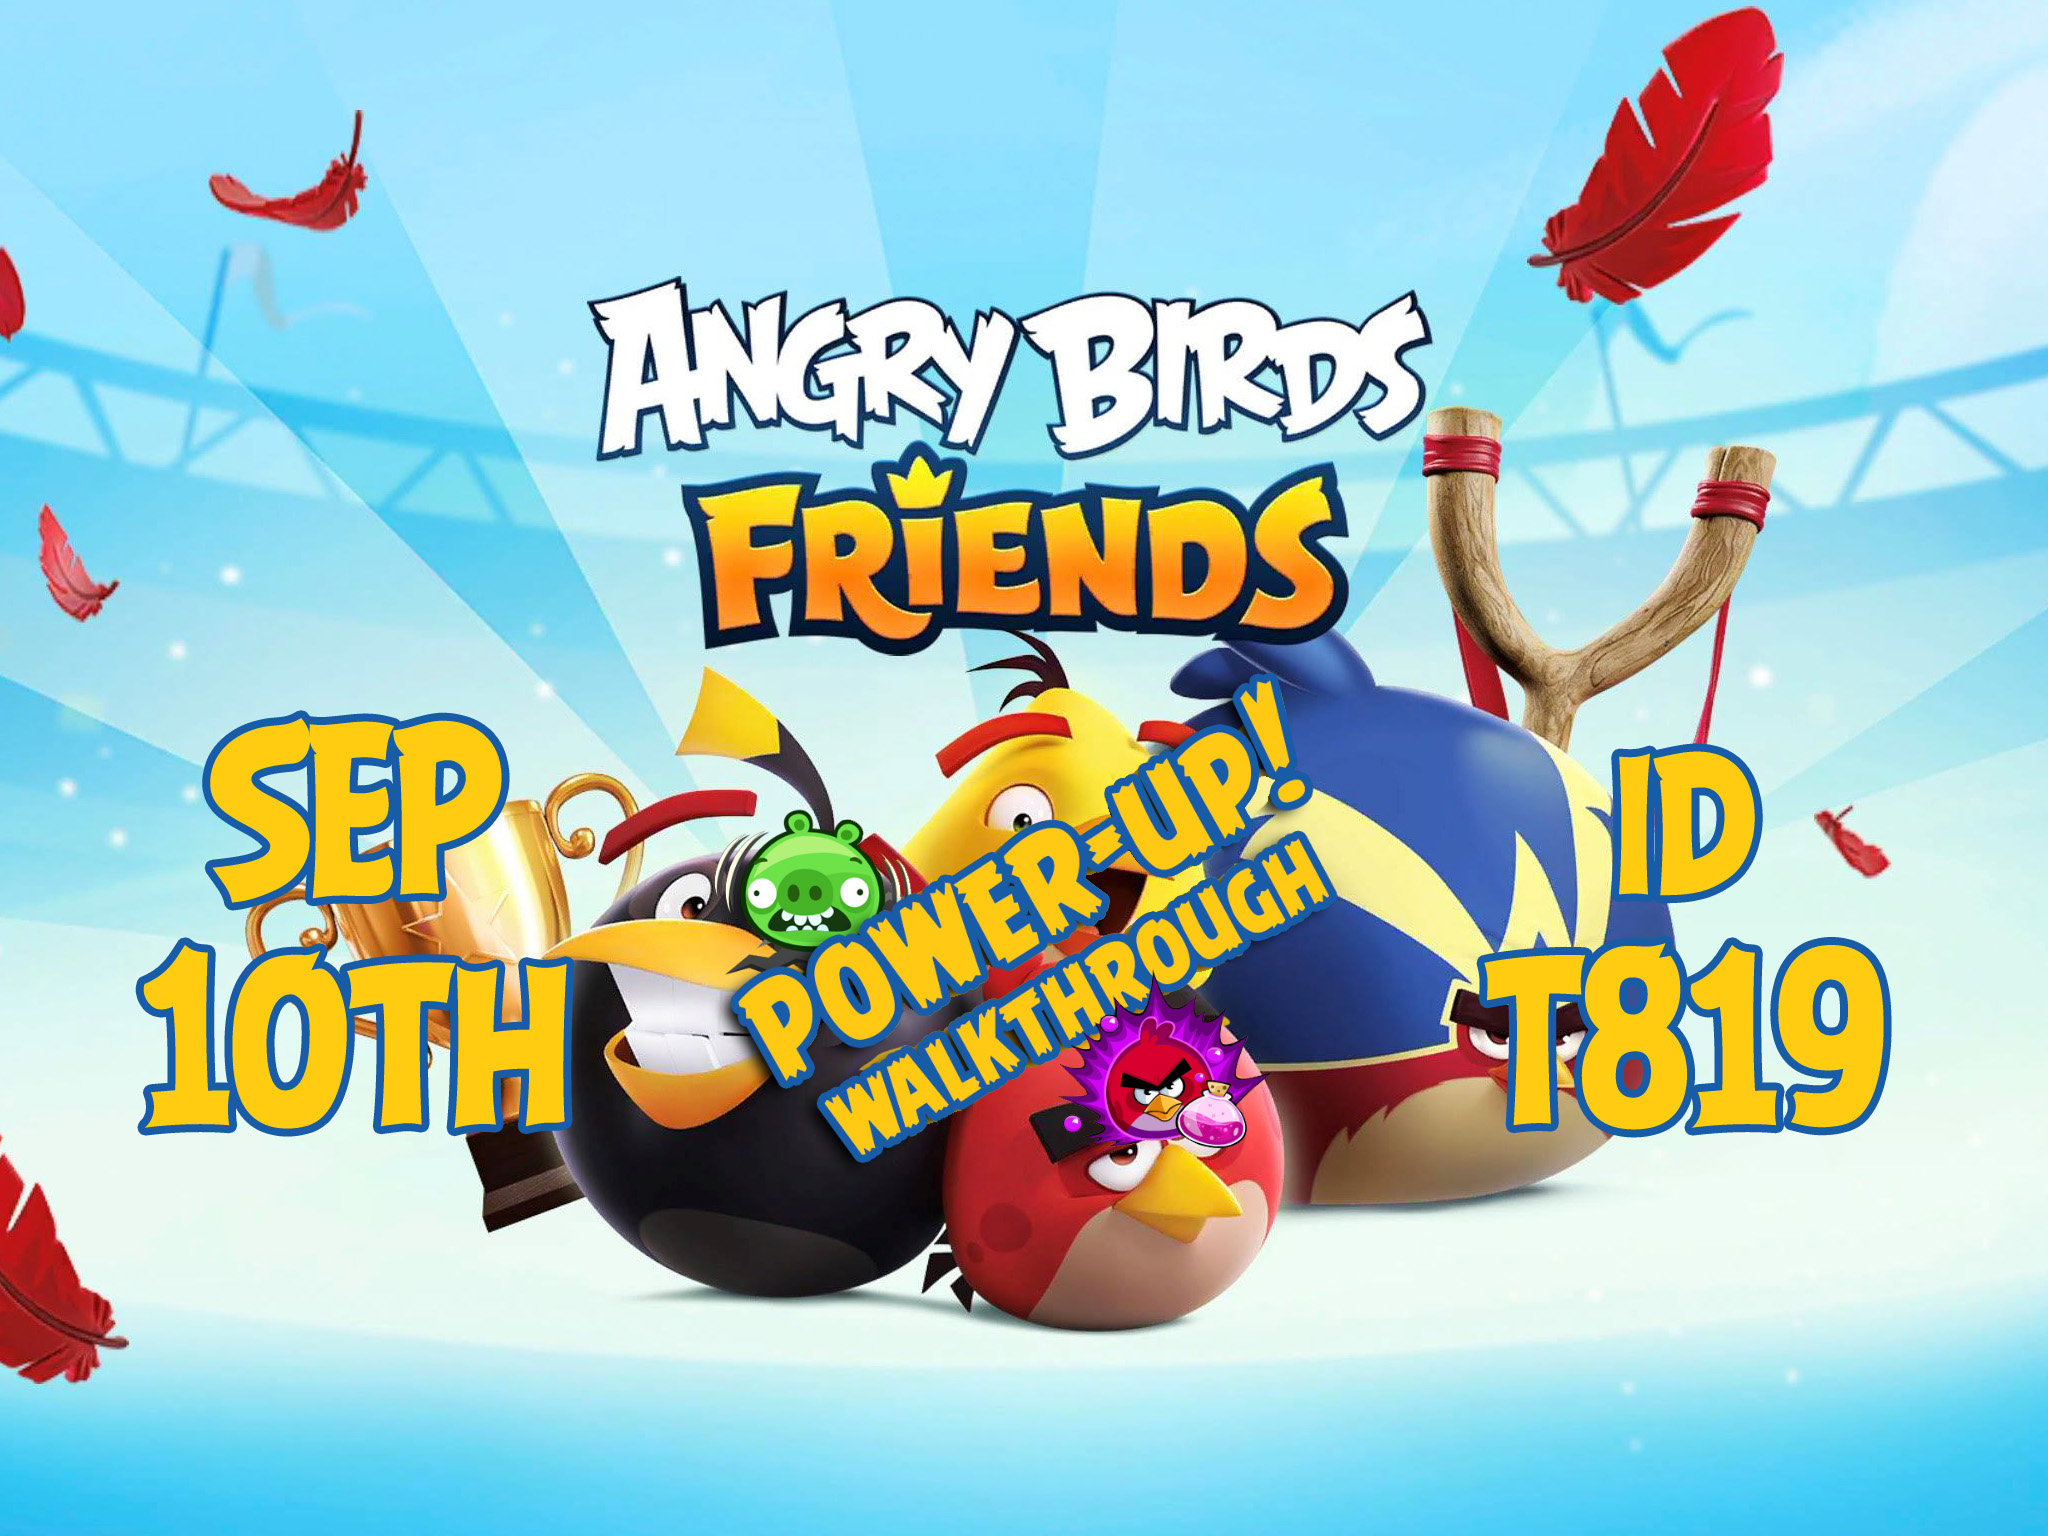 Angry-Birds-Friends-Tournament-T819a-Feature-Image-PU